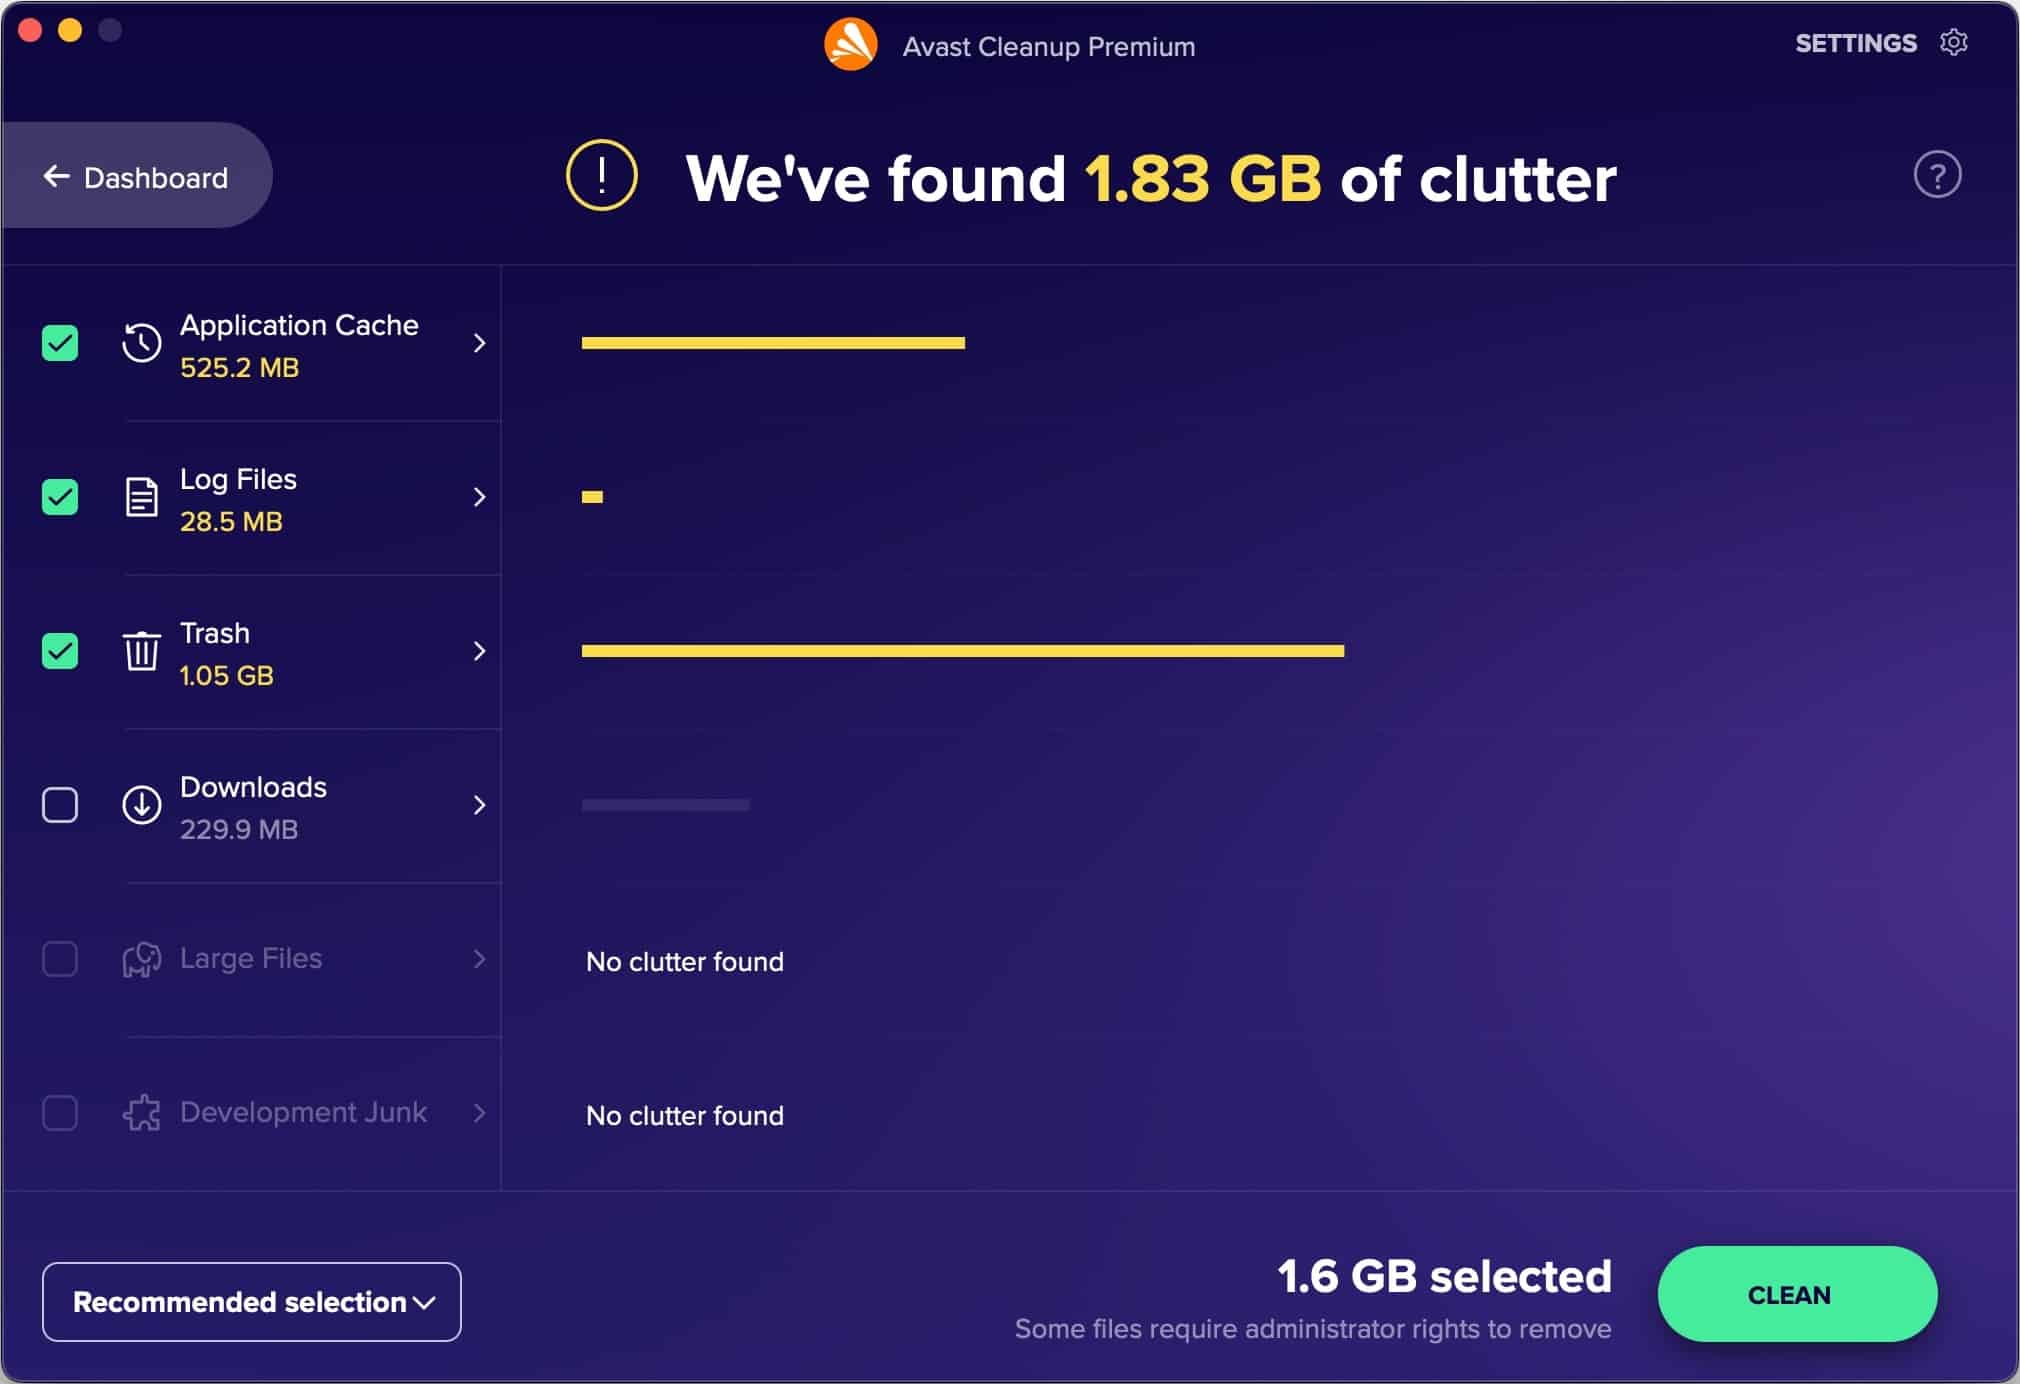 Avast Cleanup Premium's Clean Clutter feature